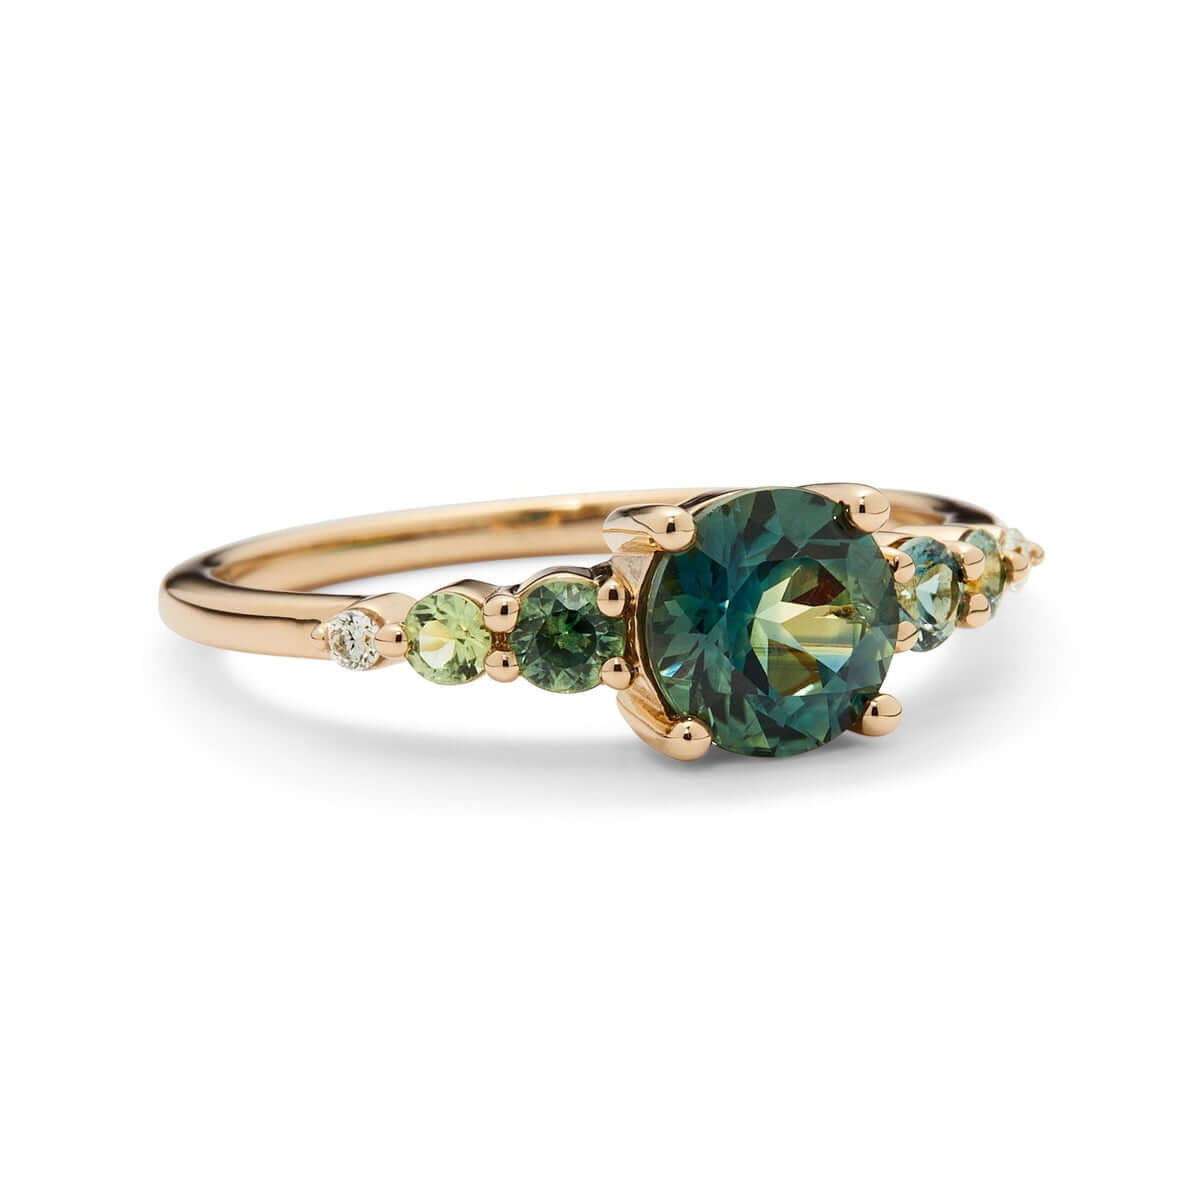 A profile view of a yellow gold ring featuring a bold green Australian sapphire flanked by sapphires and diamonds on a recycled gold band.